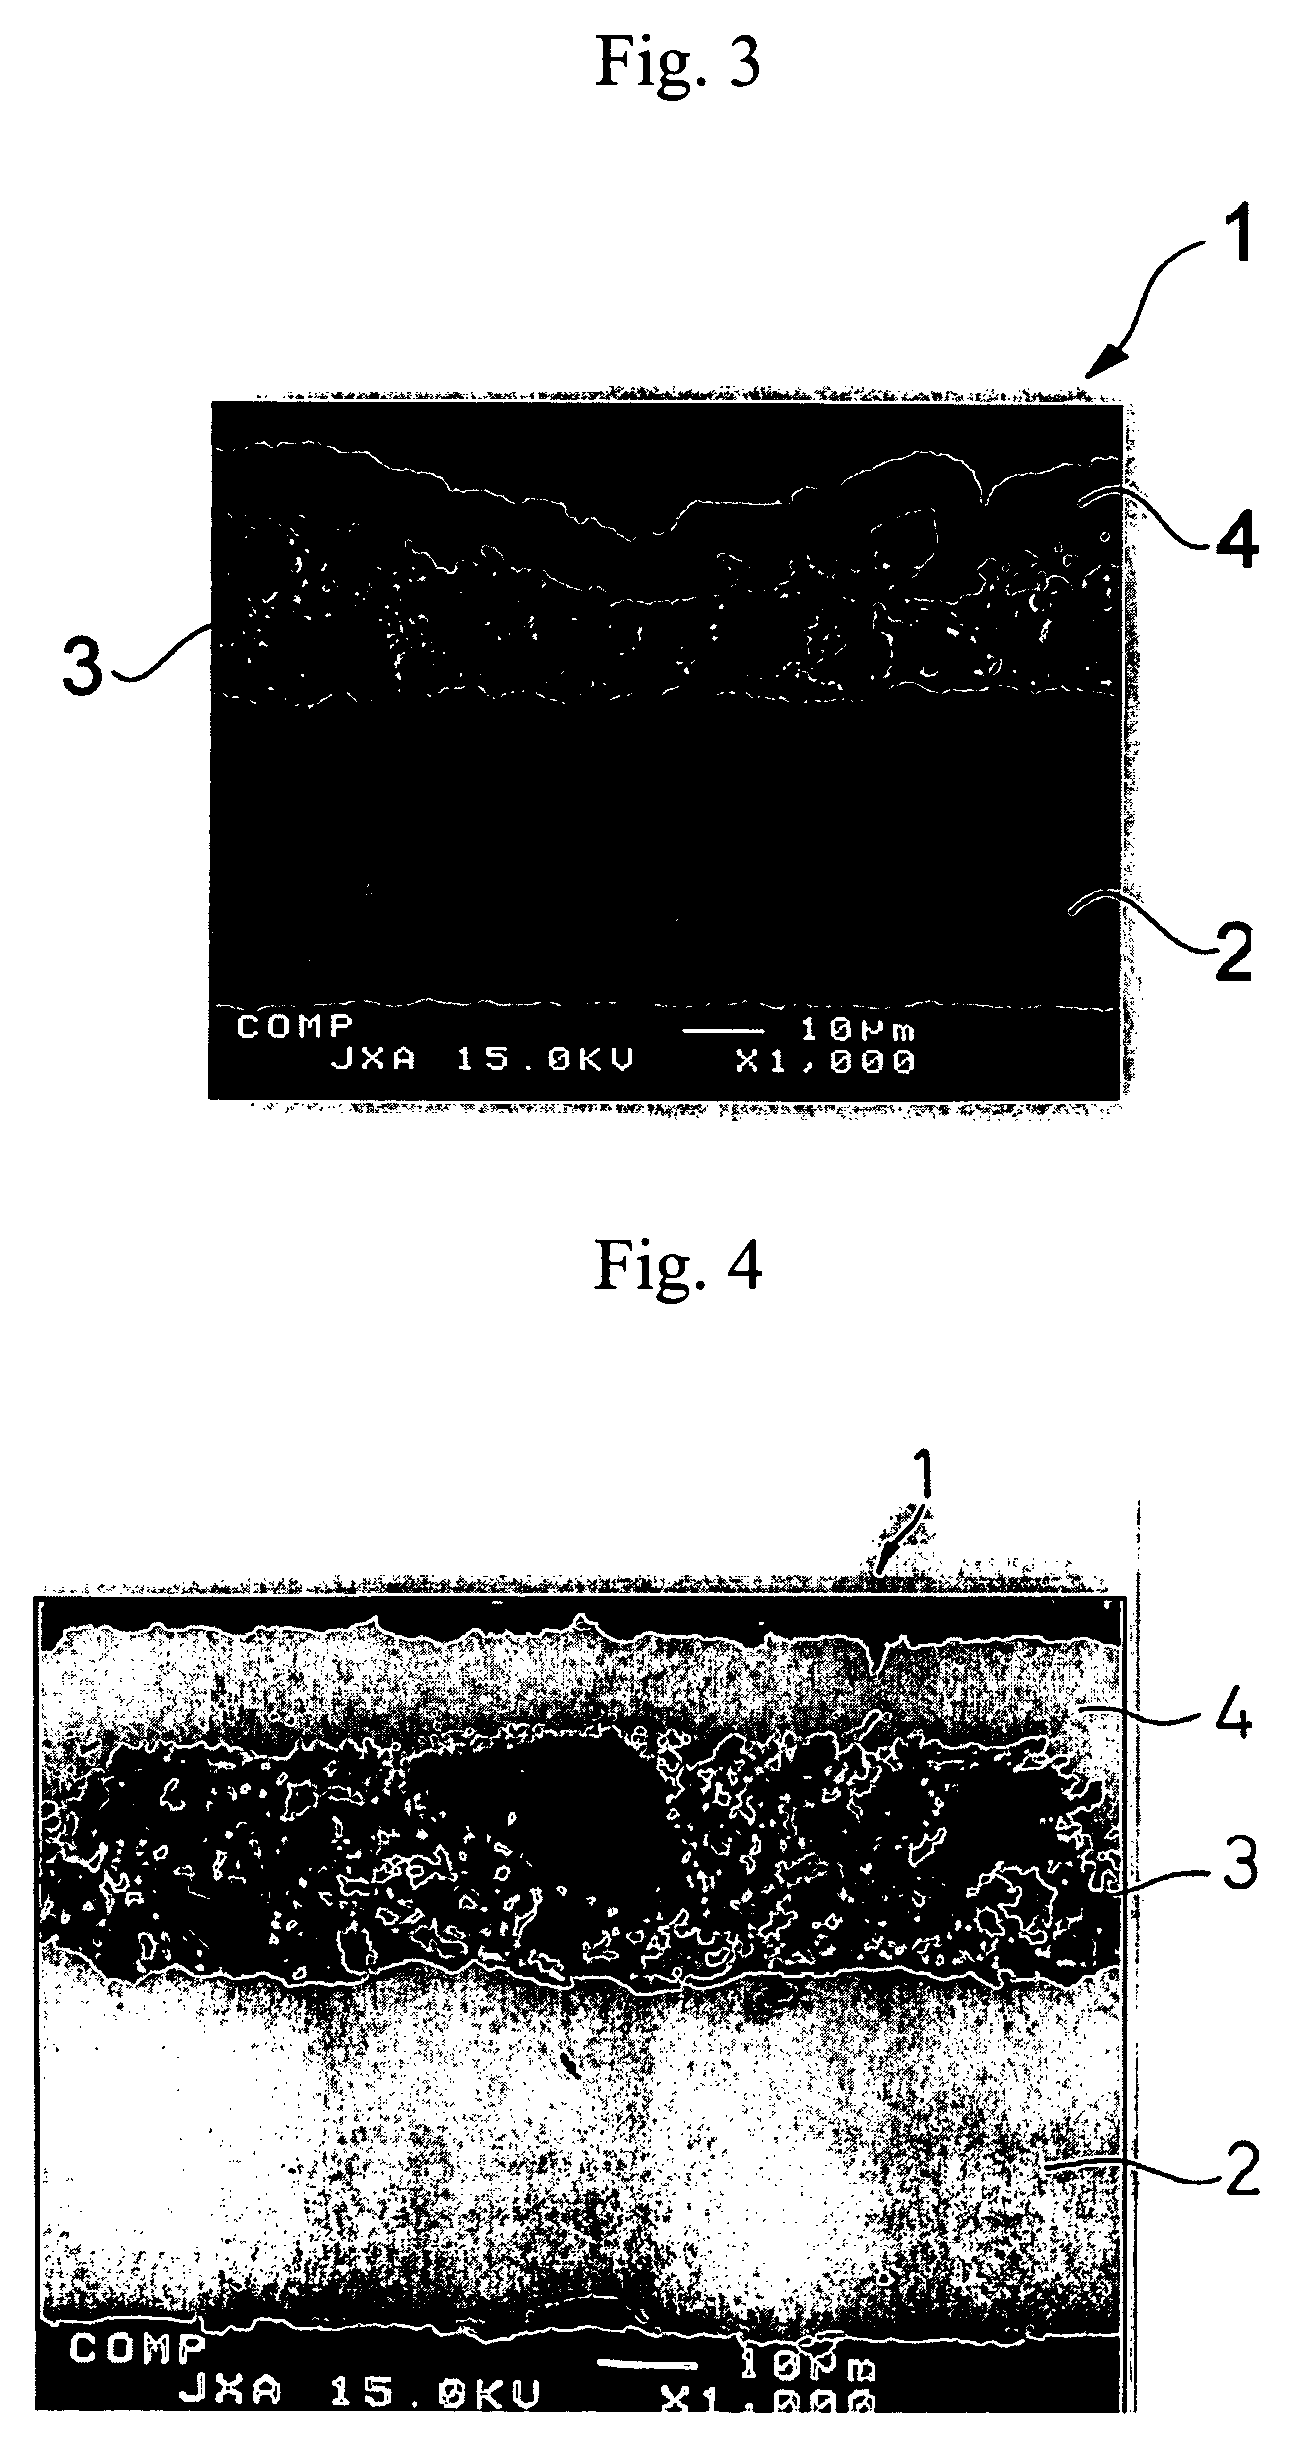 Negative electrode for nonaqueous secondary battery, process of producing the negative electrode, and nonaqueous secondary battery